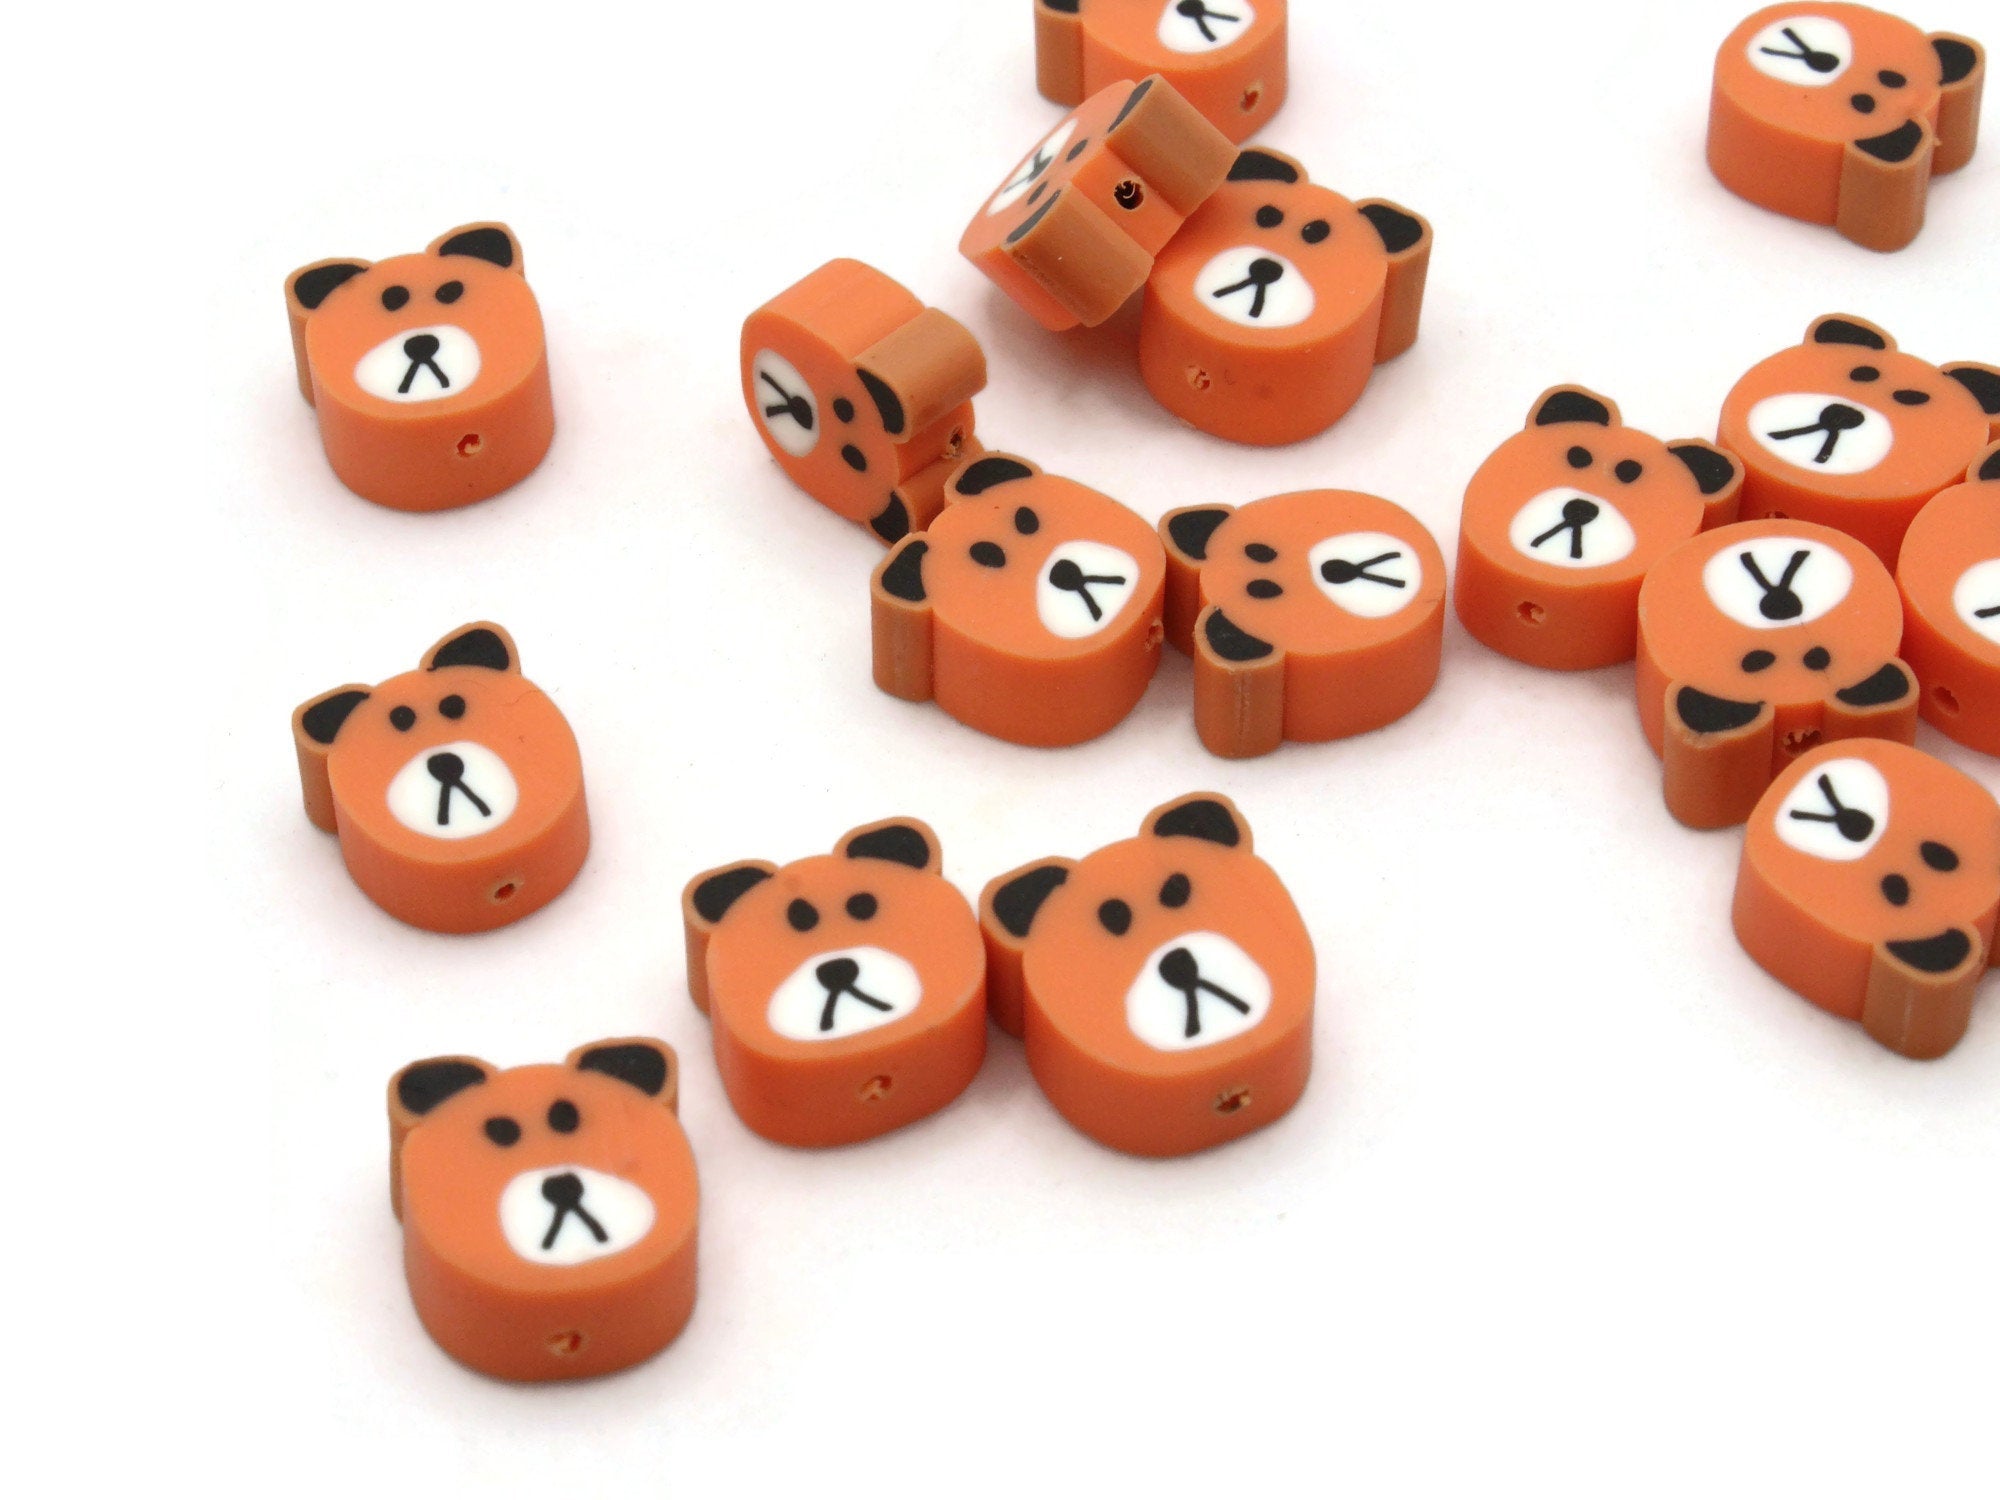 20 polymer clay beads, mixed orange, red and brown